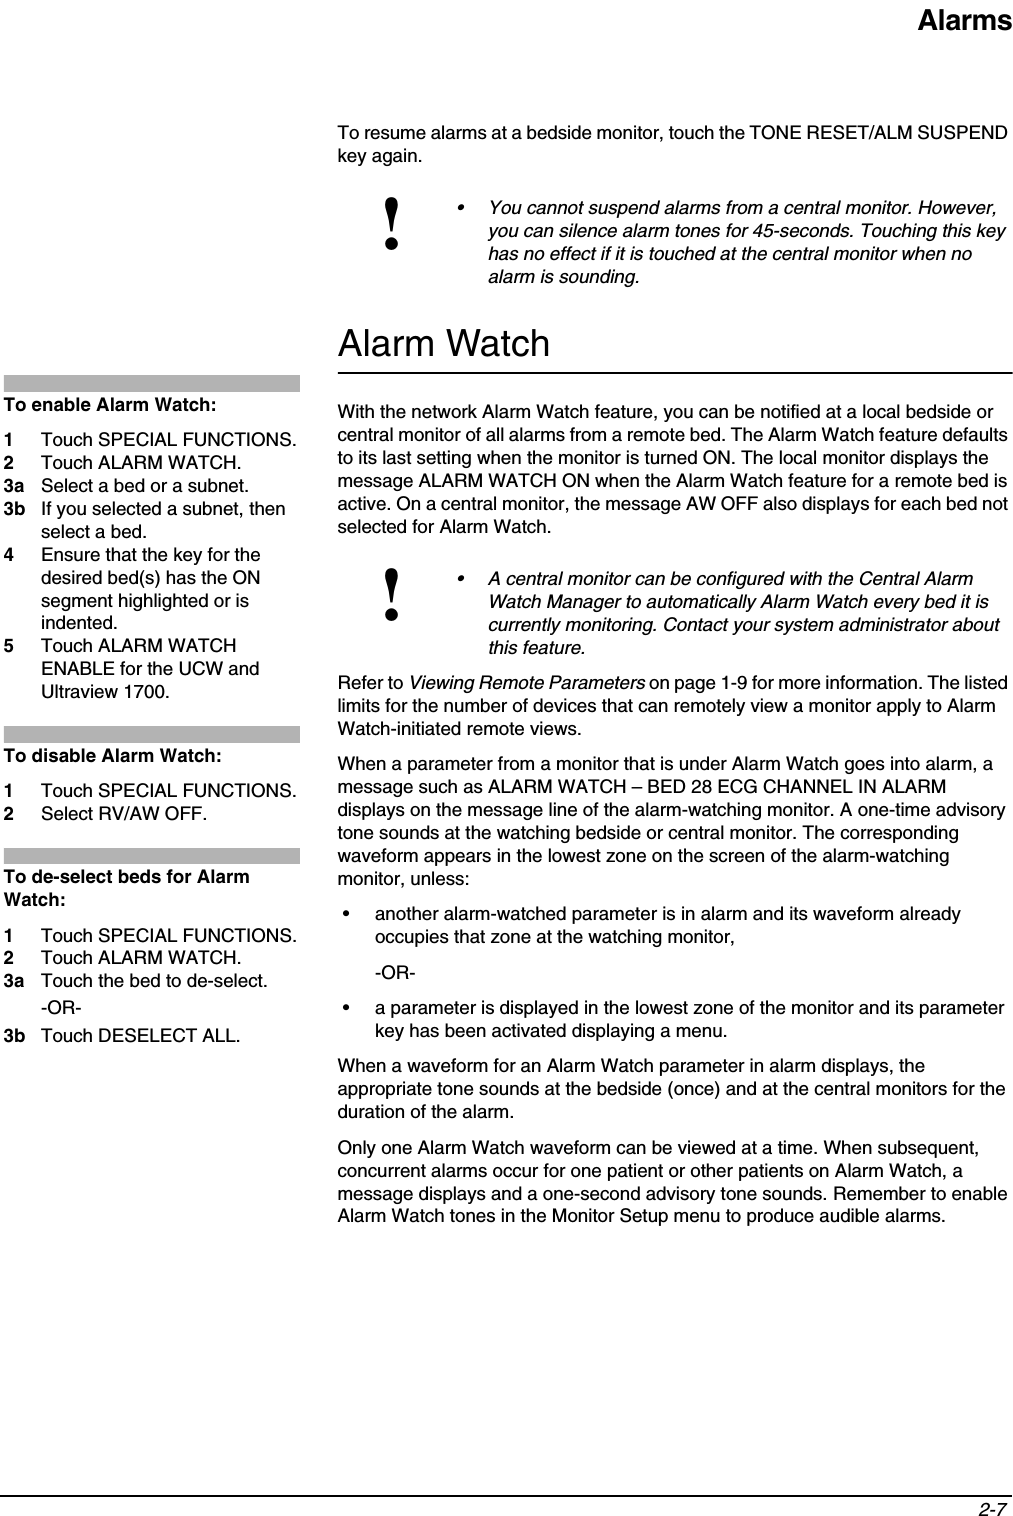 Alarms2-7 To resume alarms at a bedside monitor, touch the TONE RESET/ALM SUSPEND key again.Alarm WatchWith the network Alarm Watch feature, you can be notified at a local bedside or central monitor of all alarms from a remote bed. The Alarm Watch feature defaults to its last setting when the monitor is turned ON. The local monitor displays the message ALARM WATCH ON when the Alarm Watch feature for a remote bed is active. On a central monitor, the message AW OFF also displays for each bed not selected for Alarm Watch. Refer to Viewing Remote Parameters on page 1-9 for more information. The listed limits for the number of devices that can remotely view a monitor apply to Alarm Watch-initiated remote views.When a parameter from a monitor that is under Alarm Watch goes into alarm, a message such as ALARM WATCH – BED 28 ECG CHANNEL IN ALARM displays on the message line of the alarm-watching monitor. A one-time advisory tone sounds at the watching bedside or central monitor. The corresponding waveform appears in the lowest zone on the screen of the alarm-watching monitor, unless:• another alarm-watched parameter is in alarm and its waveform already occupies that zone at the watching monitor,-OR-• a parameter is displayed in the lowest zone of the monitor and its parameter key has been activated displaying a menu.When a waveform for an Alarm Watch parameter in alarm displays, the appropriate tone sounds at the bedside (once) and at the central monitors for the duration of the alarm.Only one Alarm Watch waveform can be viewed at a time. When subsequent, concurrent alarms occur for one patient or other patients on Alarm Watch, a message displays and a one-second advisory tone sounds. Remember to enable Alarm Watch tones in the Monitor Setup menu to produce audible alarms.!• You cannot suspend alarms from a central monitor. However, you can silence alarm tones for 45-seconds. Touching this key has no effect if it is touched at the central monitor when no alarm is sounding. !• A central monitor can be configured with the Central Alarm Watch Manager to automatically Alarm Watch every bed it is currently monitoring. Contact your system administrator about this feature.To enable Alarm Watch:1Touch SPECIAL FUNCTIONS. 2Touch ALARM WATCH.3a Select a bed or a subnet.3b If you selected a subnet, then select a bed.4Ensure that the key for the desired bed(s) has the ON segment highlighted or is indented.5Touch ALARM WATCH ENABLE for the UCW and Ultraview 1700.To disable Alarm Watch: 1Touch SPECIAL FUNCTIONS. 2Select RV/AW OFF.To de-select beds for Alarm Watch:1Touch SPECIAL FUNCTIONS.2Touch ALARM WATCH.3a Touch the bed to de-select.-OR-3b Touch DESELECT ALL.